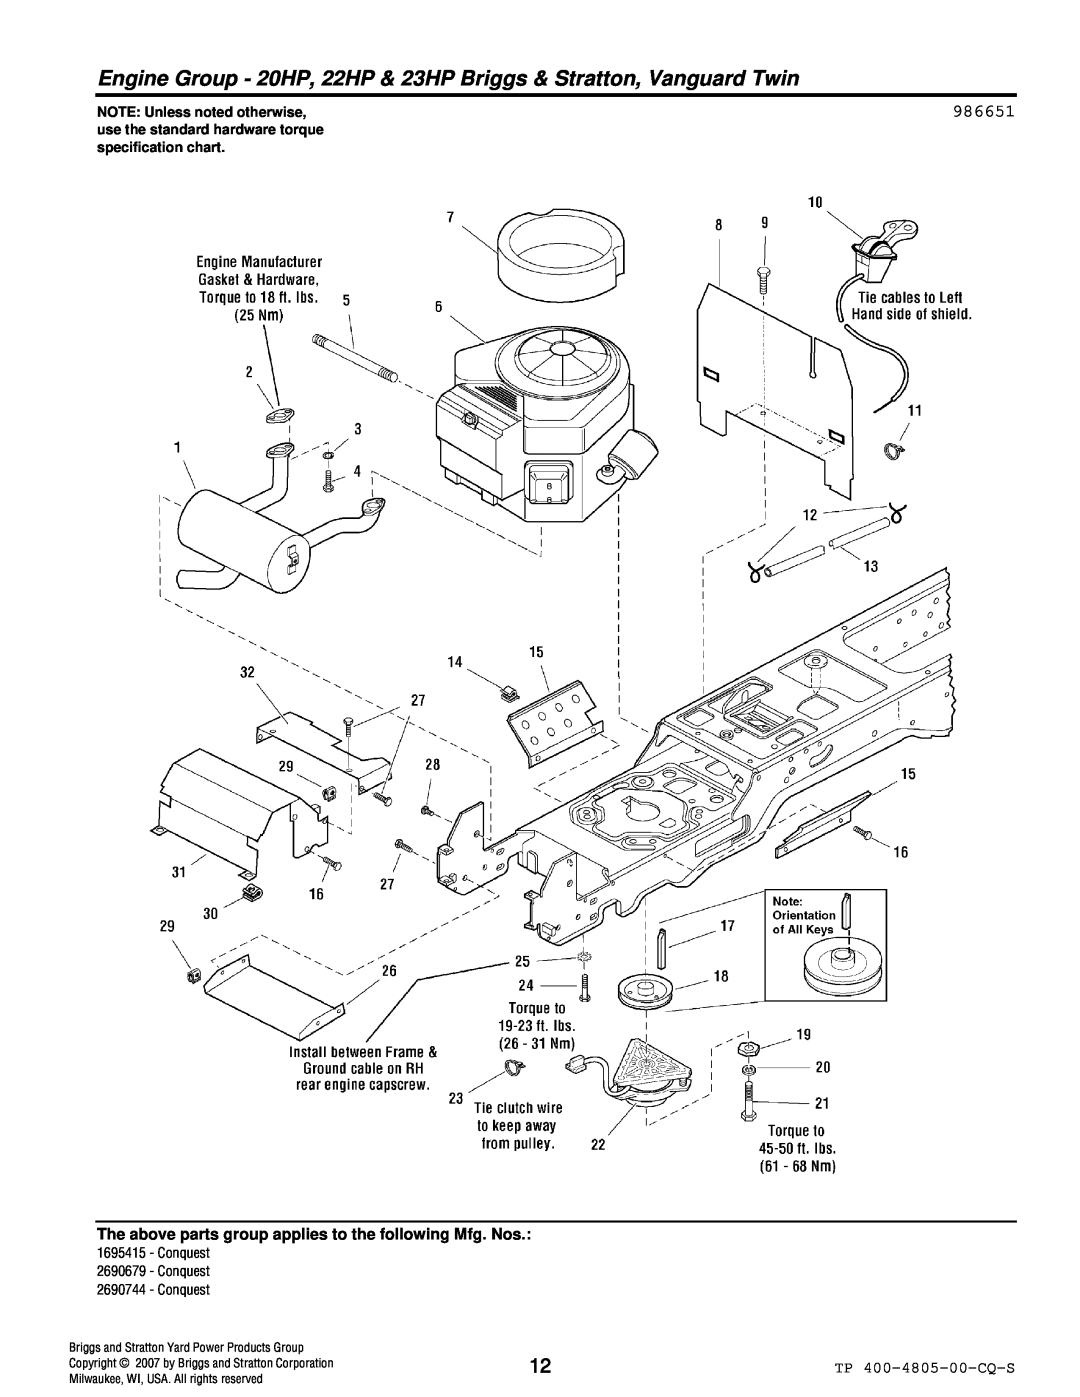 Simplicity 4WD Series manual 986651, NOTE: Unless noted otherwise, Briggs and Stratton Yard Power Products Group 